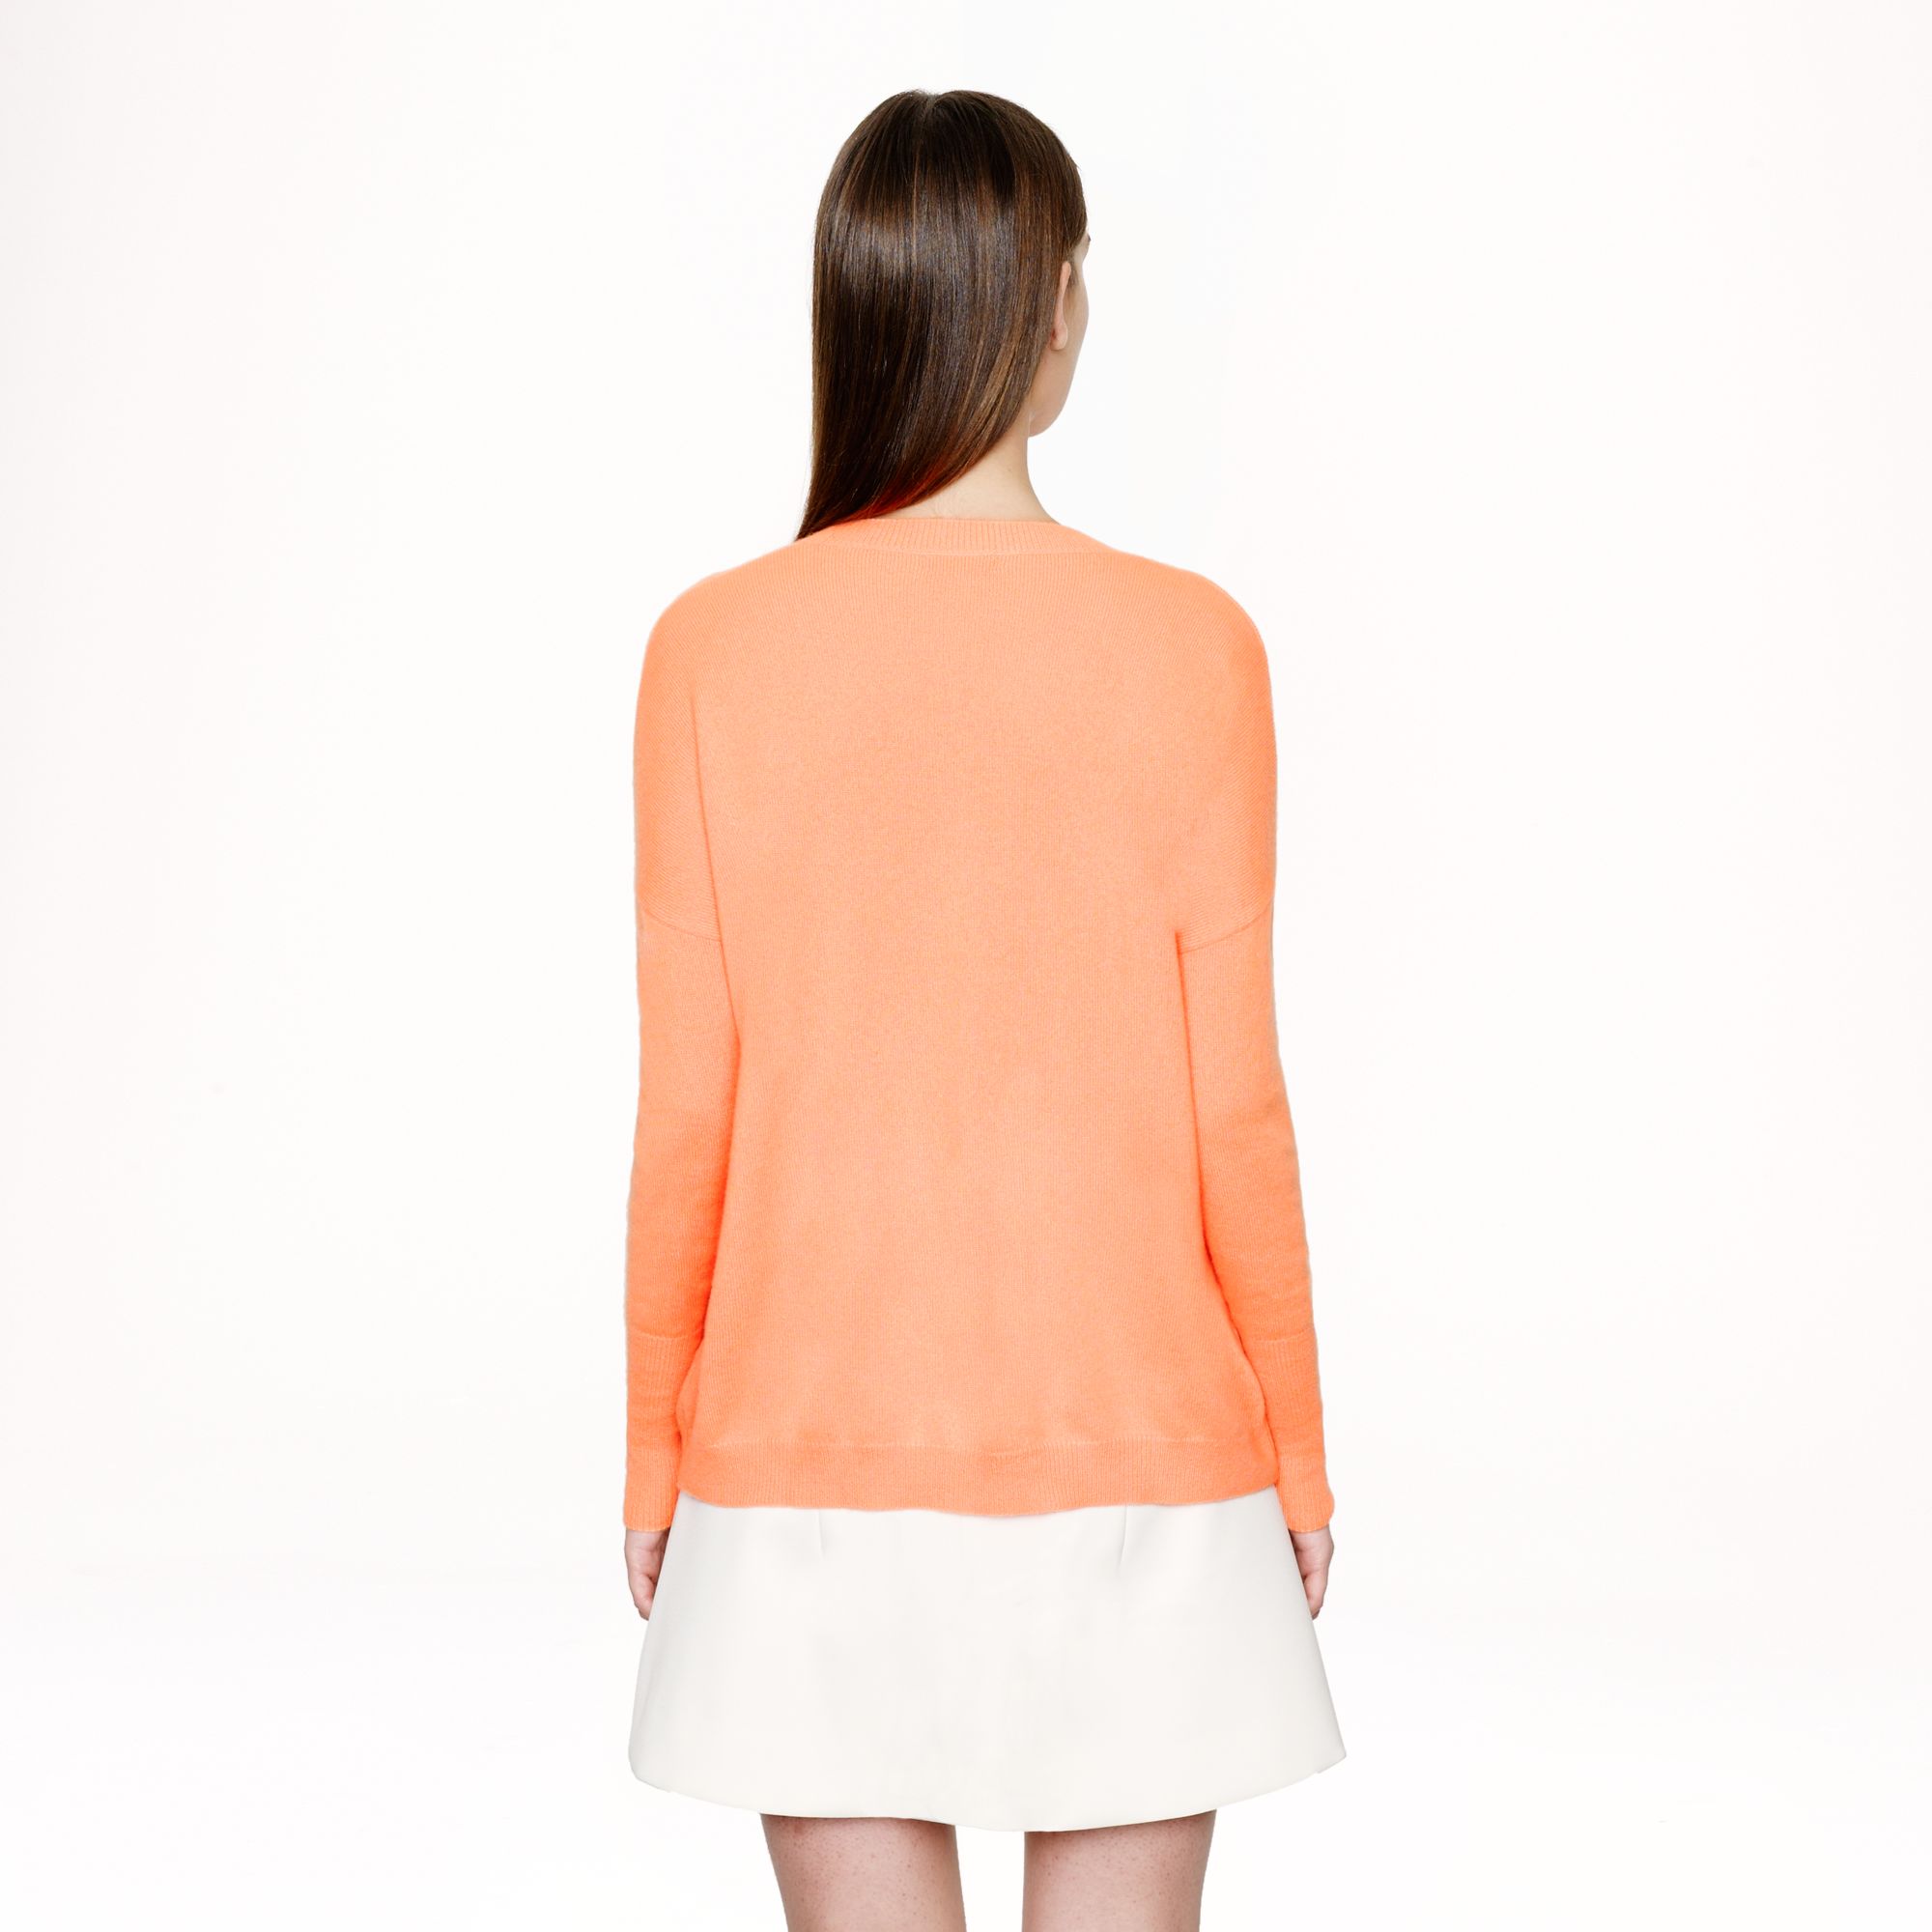 J.crew Collection Cashmere V-neck Sweater in Orange | Lyst